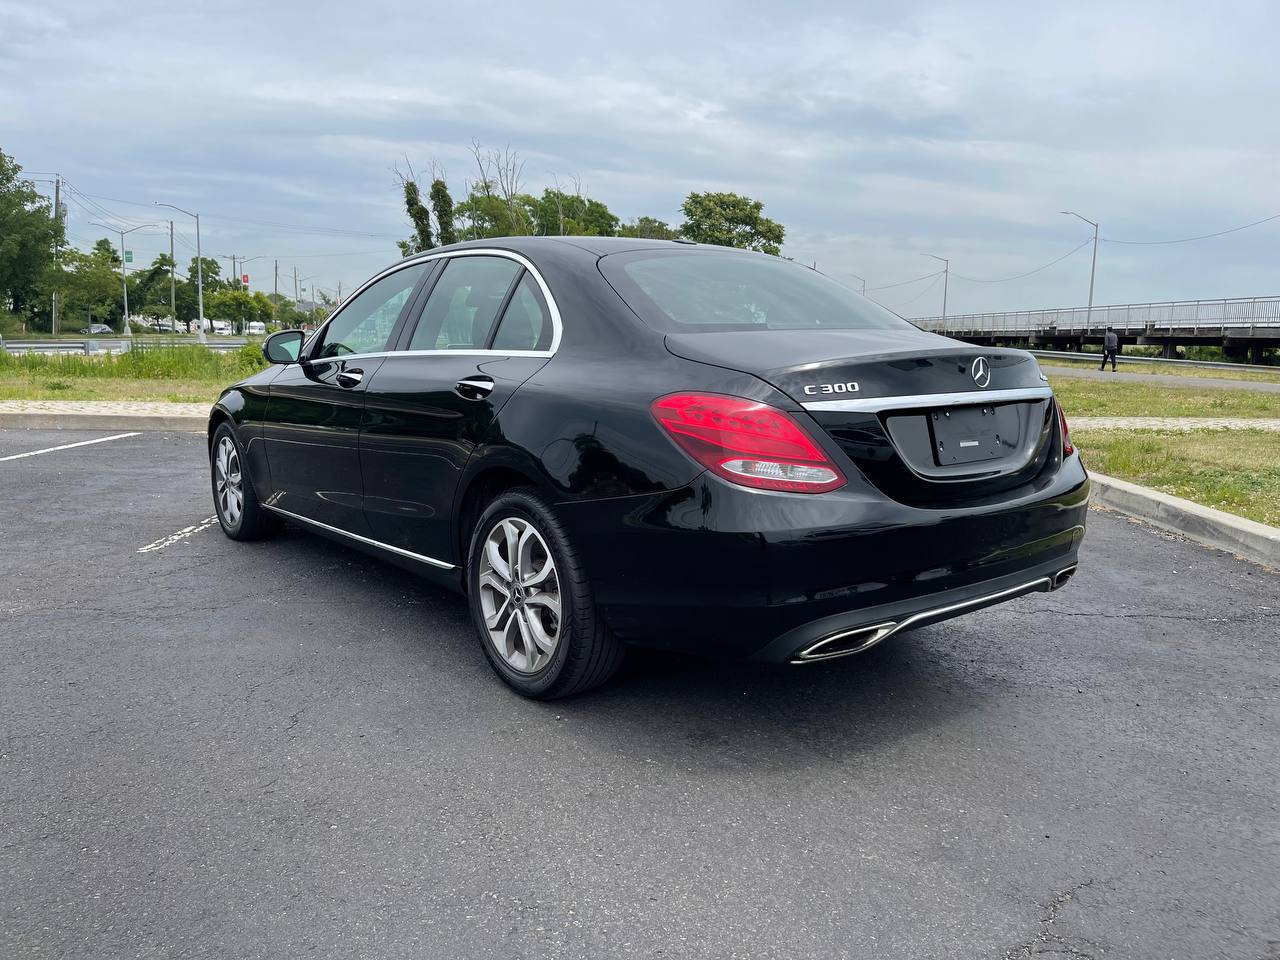 Used - Mercedes-Benz C 300 4MATIC AWD Sedan for sale in Staten Island NY